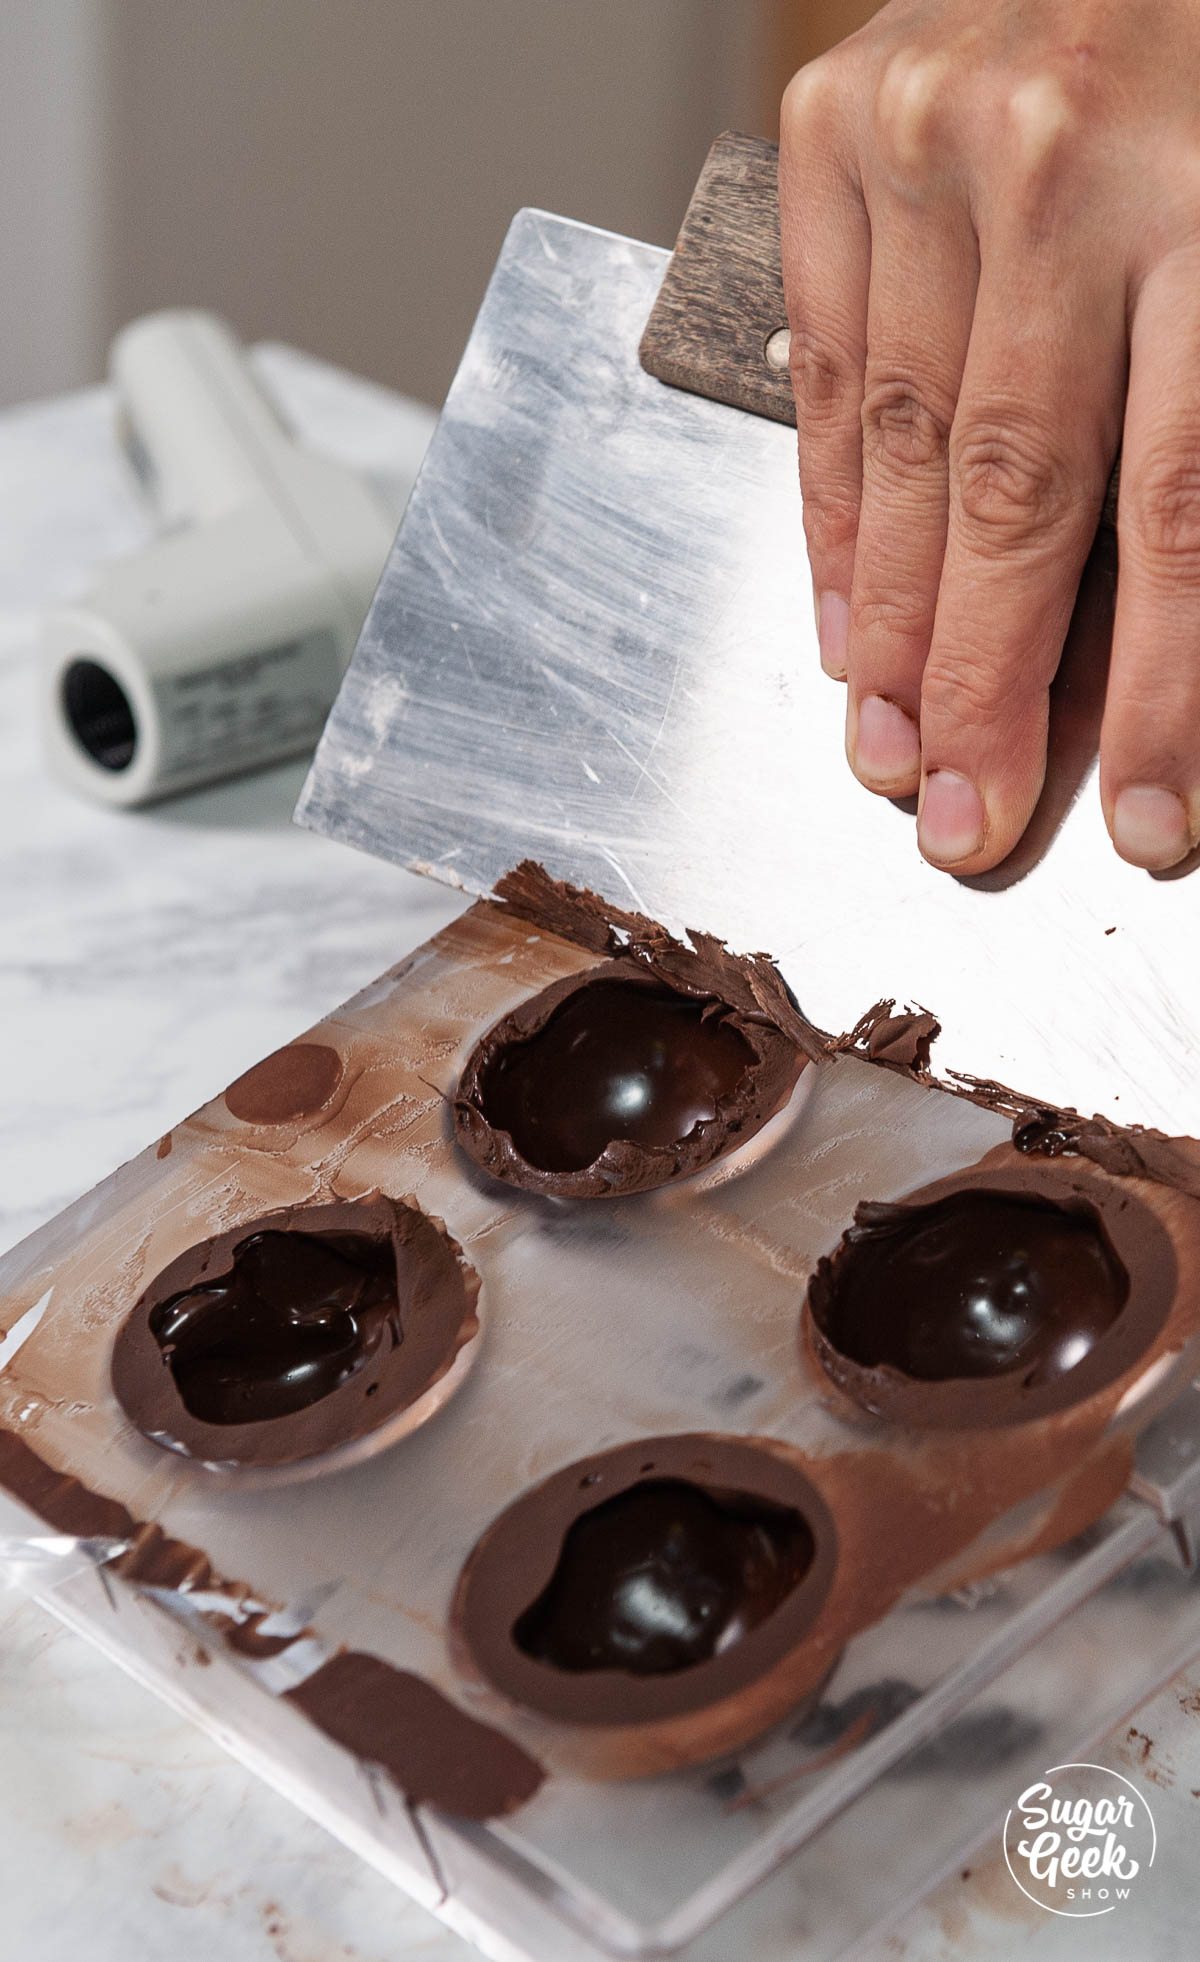 scraping excess chocolate off the mold